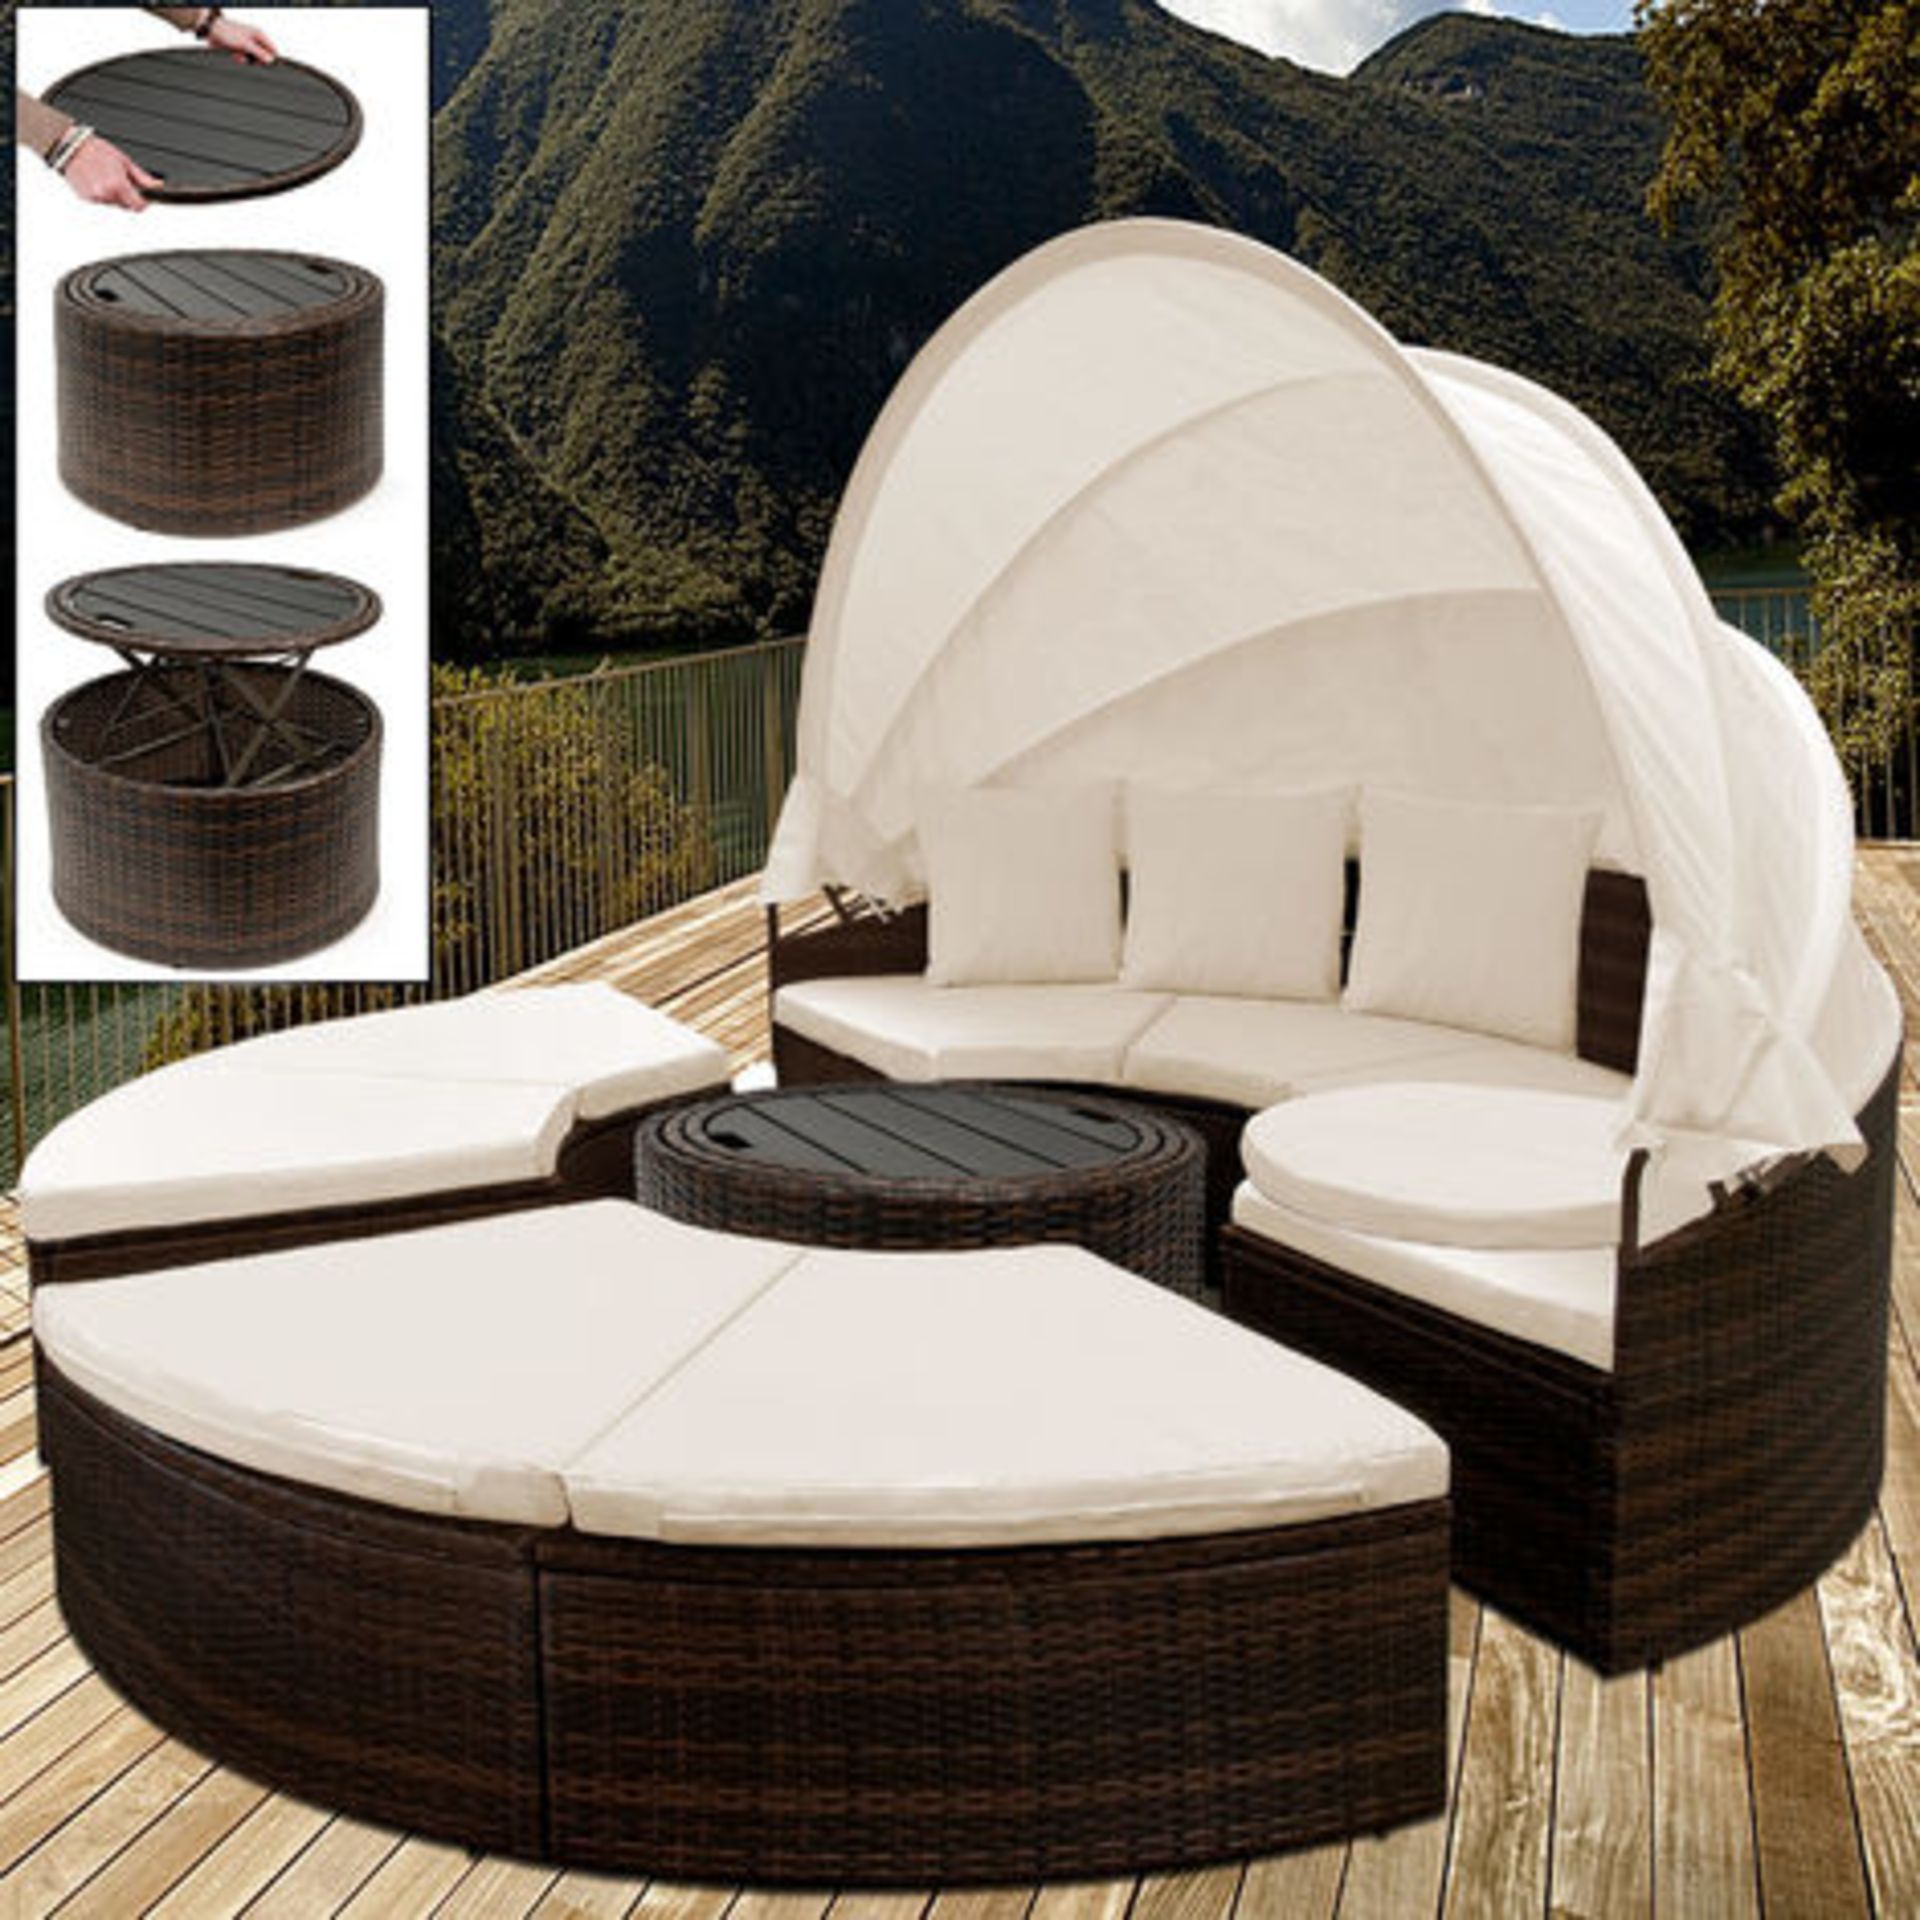 V Brand New Rattan Day Bed With Retractable Canopy & Telescopic Table - Includes Removable Water